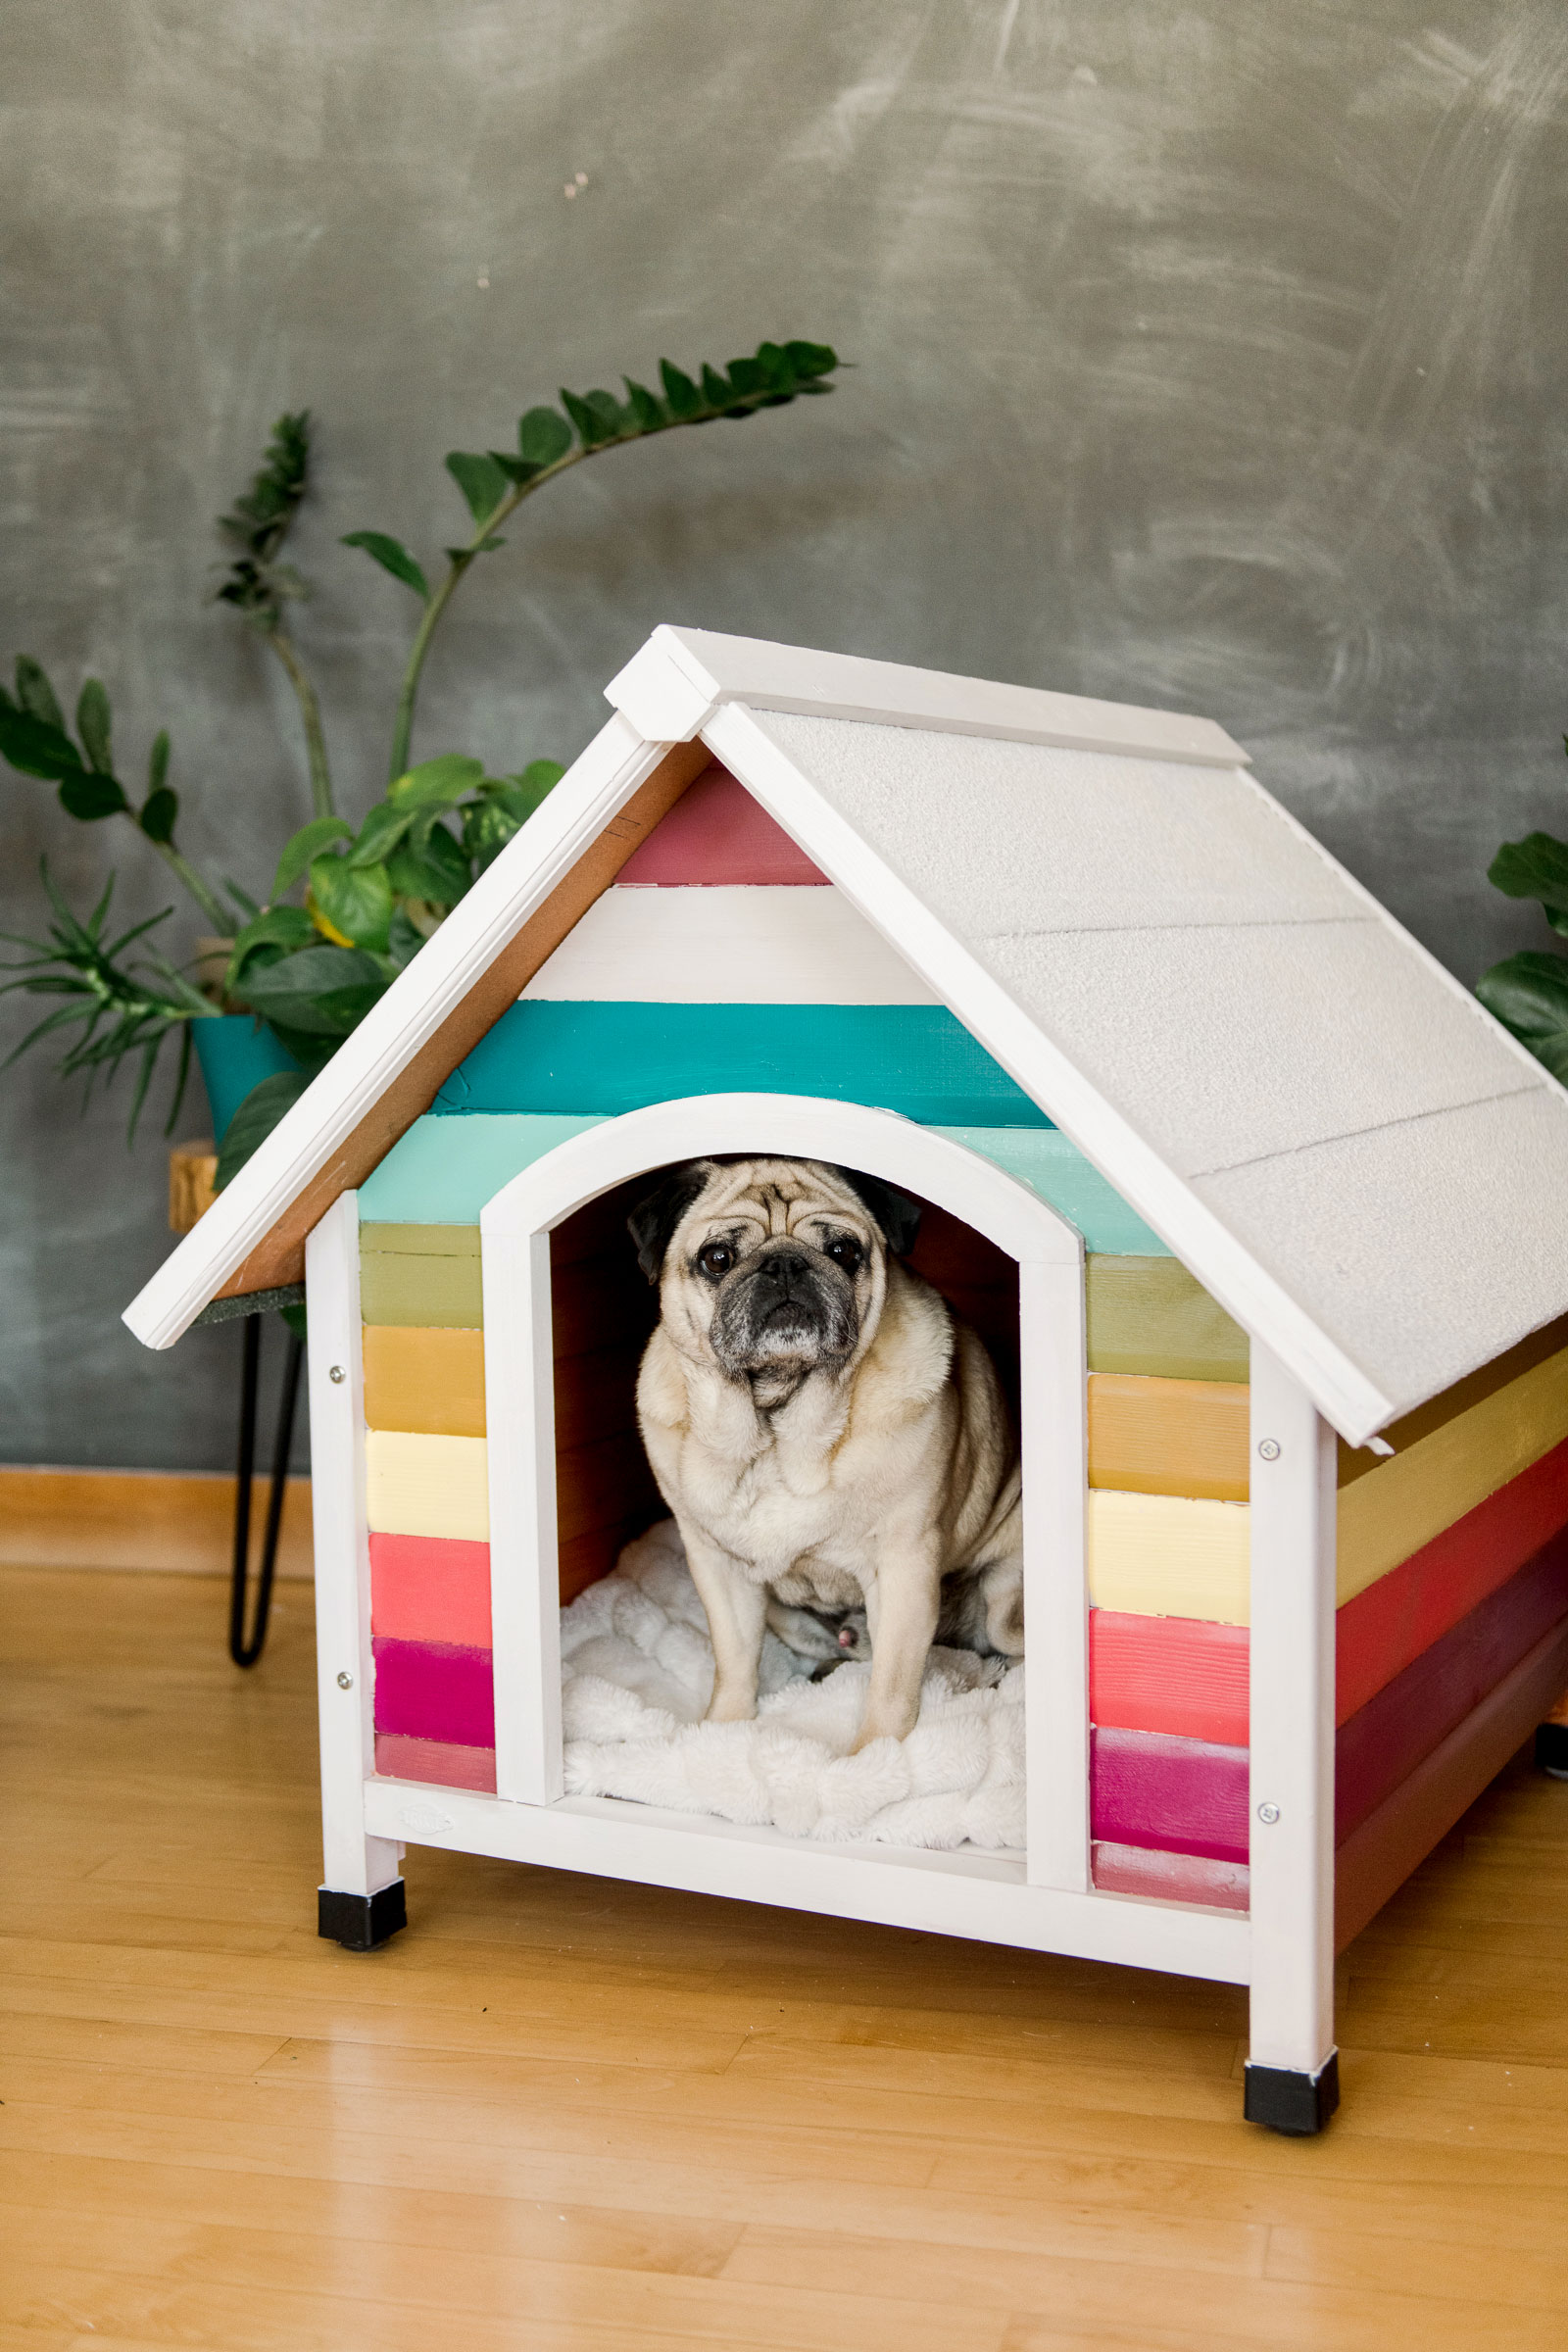 The most colorful dog house